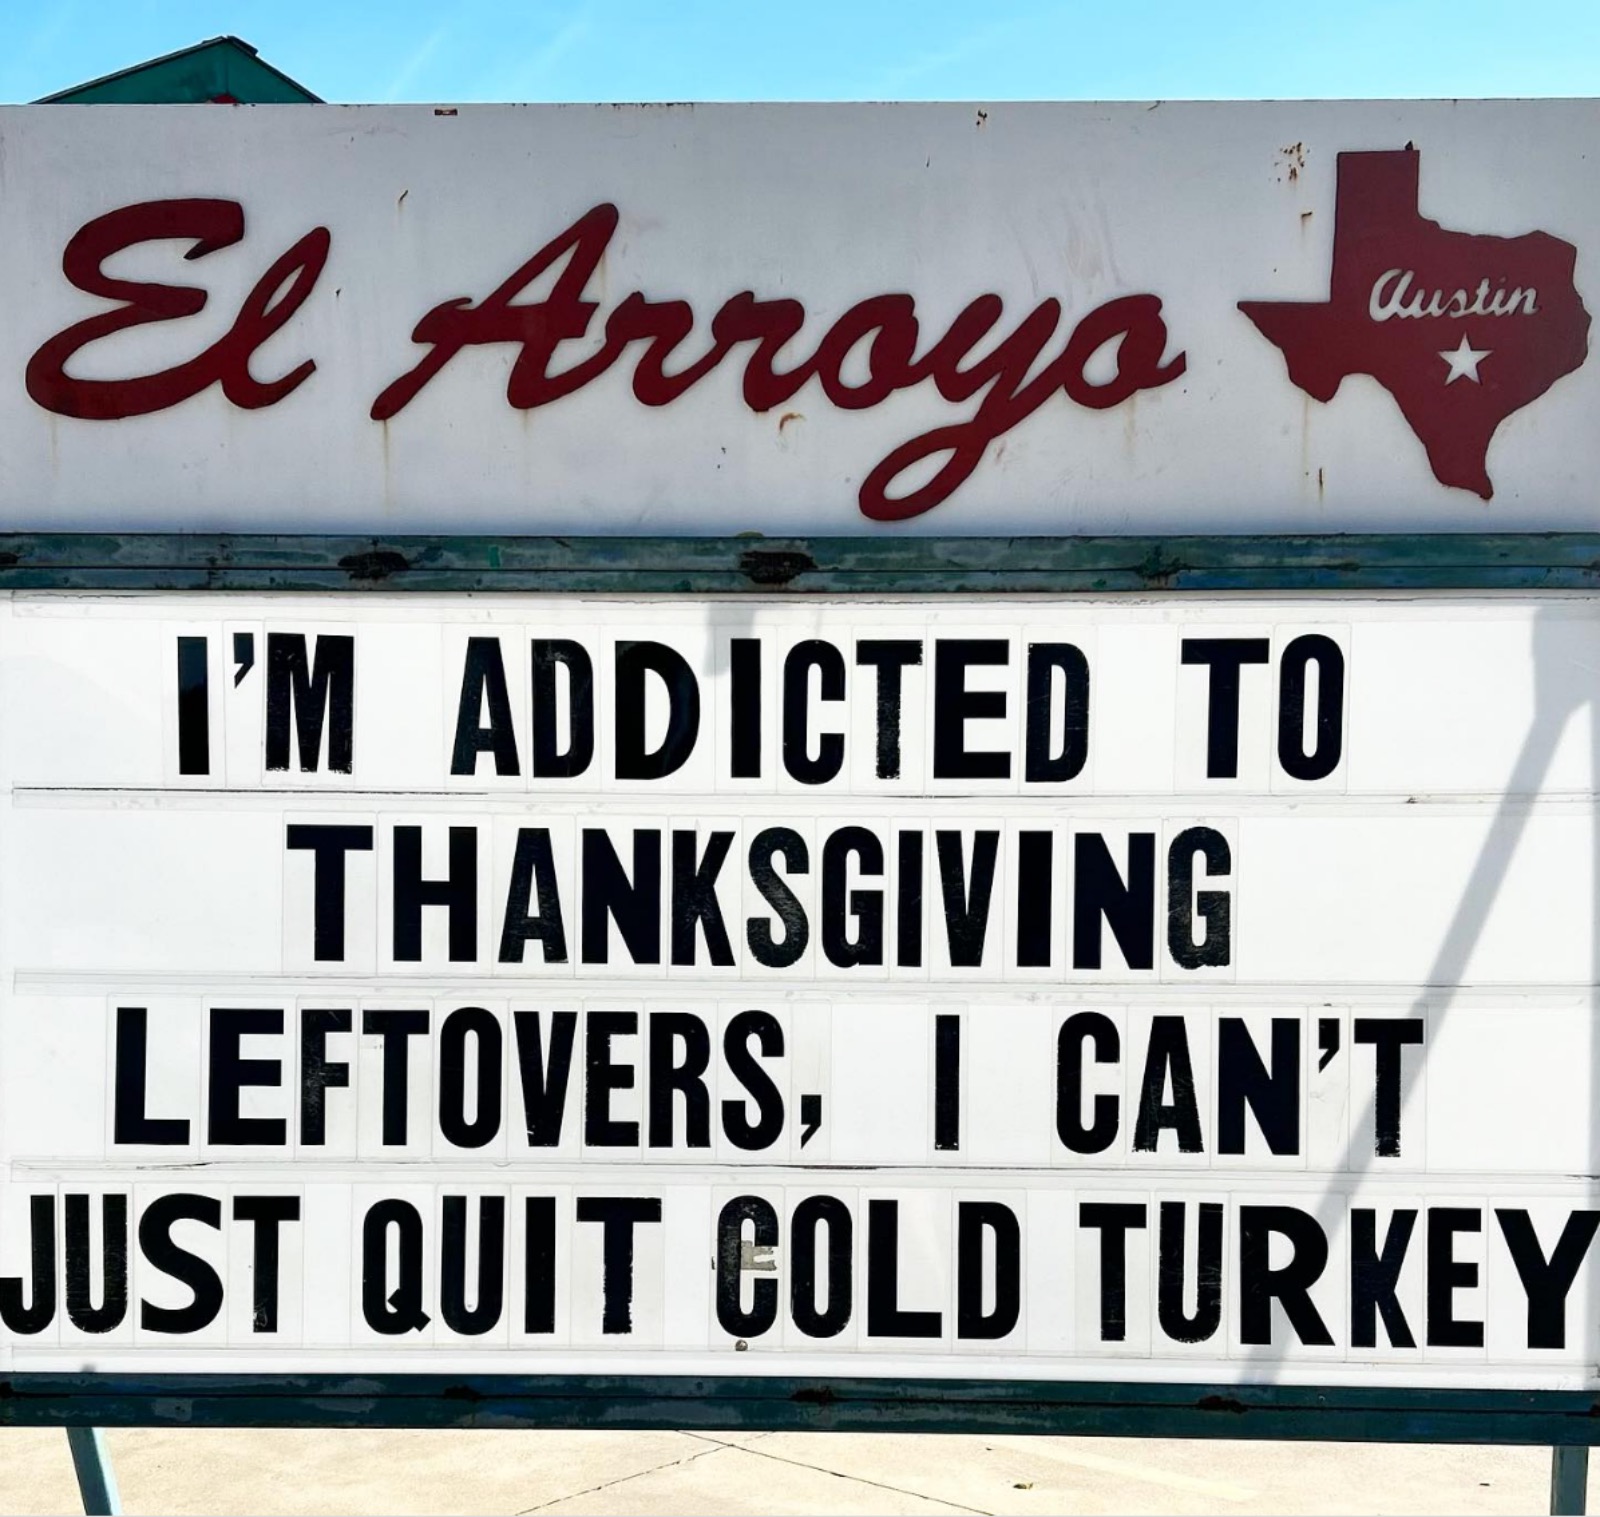 meme about Thanksgiving food leftovers